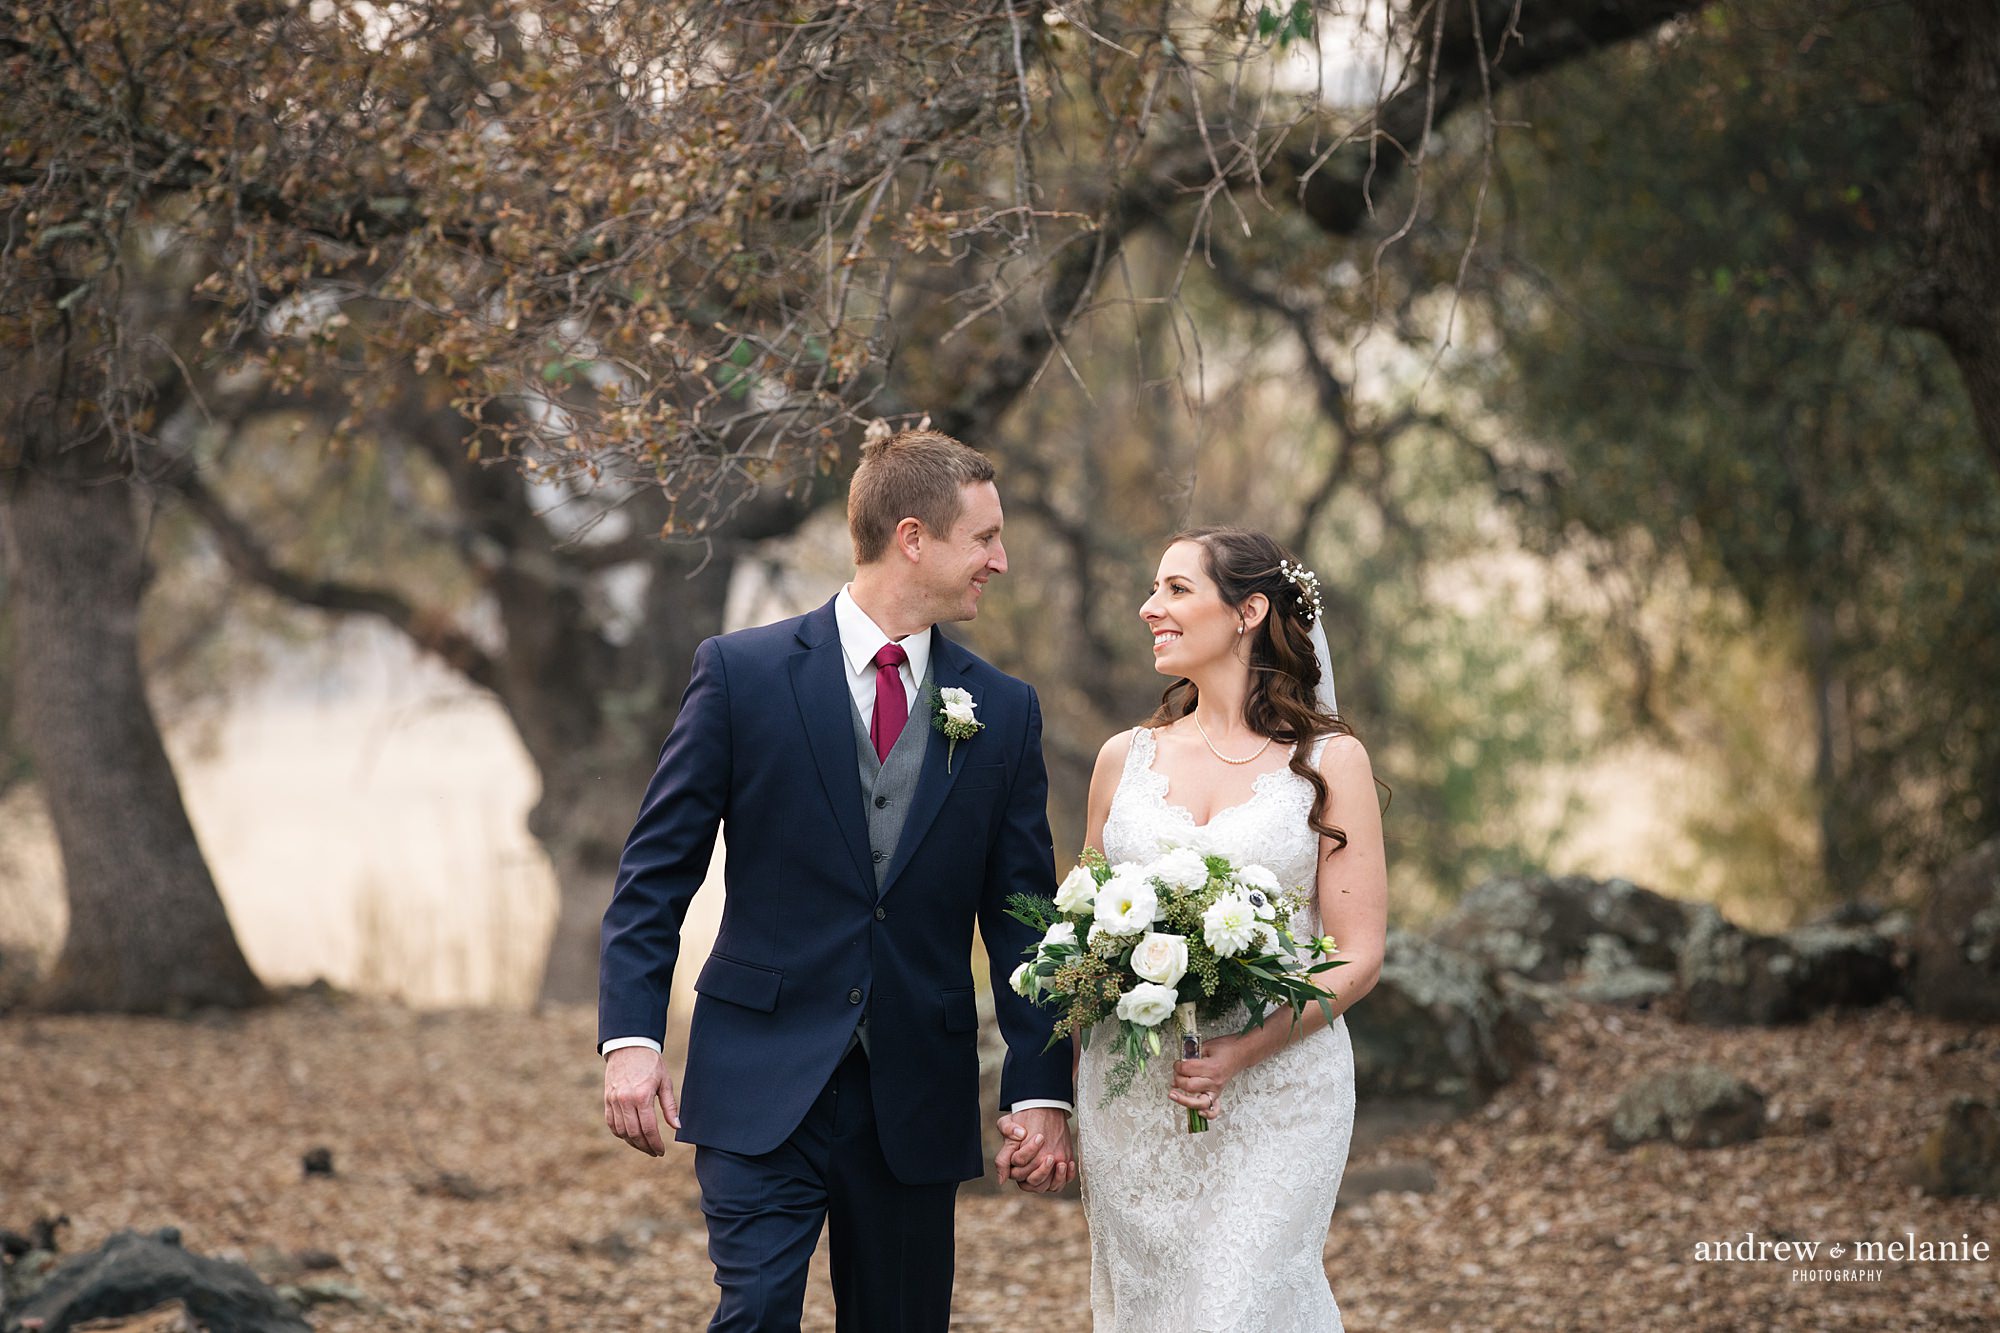 Andrew and Melanie Photography wedding highlights